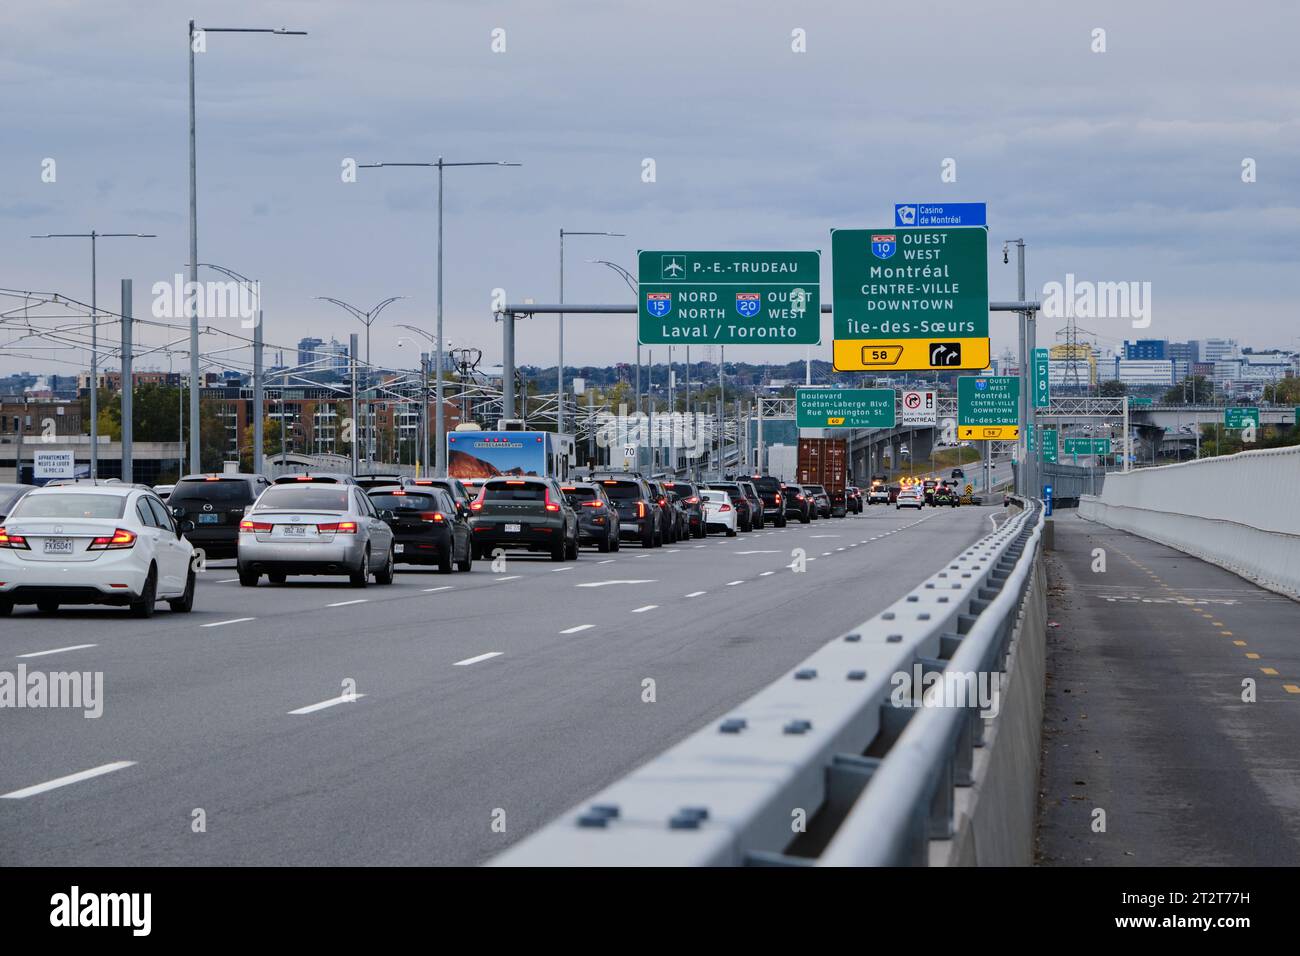 traffic jam on Champlain Bridge coming into Montreal following an accident, with cars stopped before exit. Stock Photo